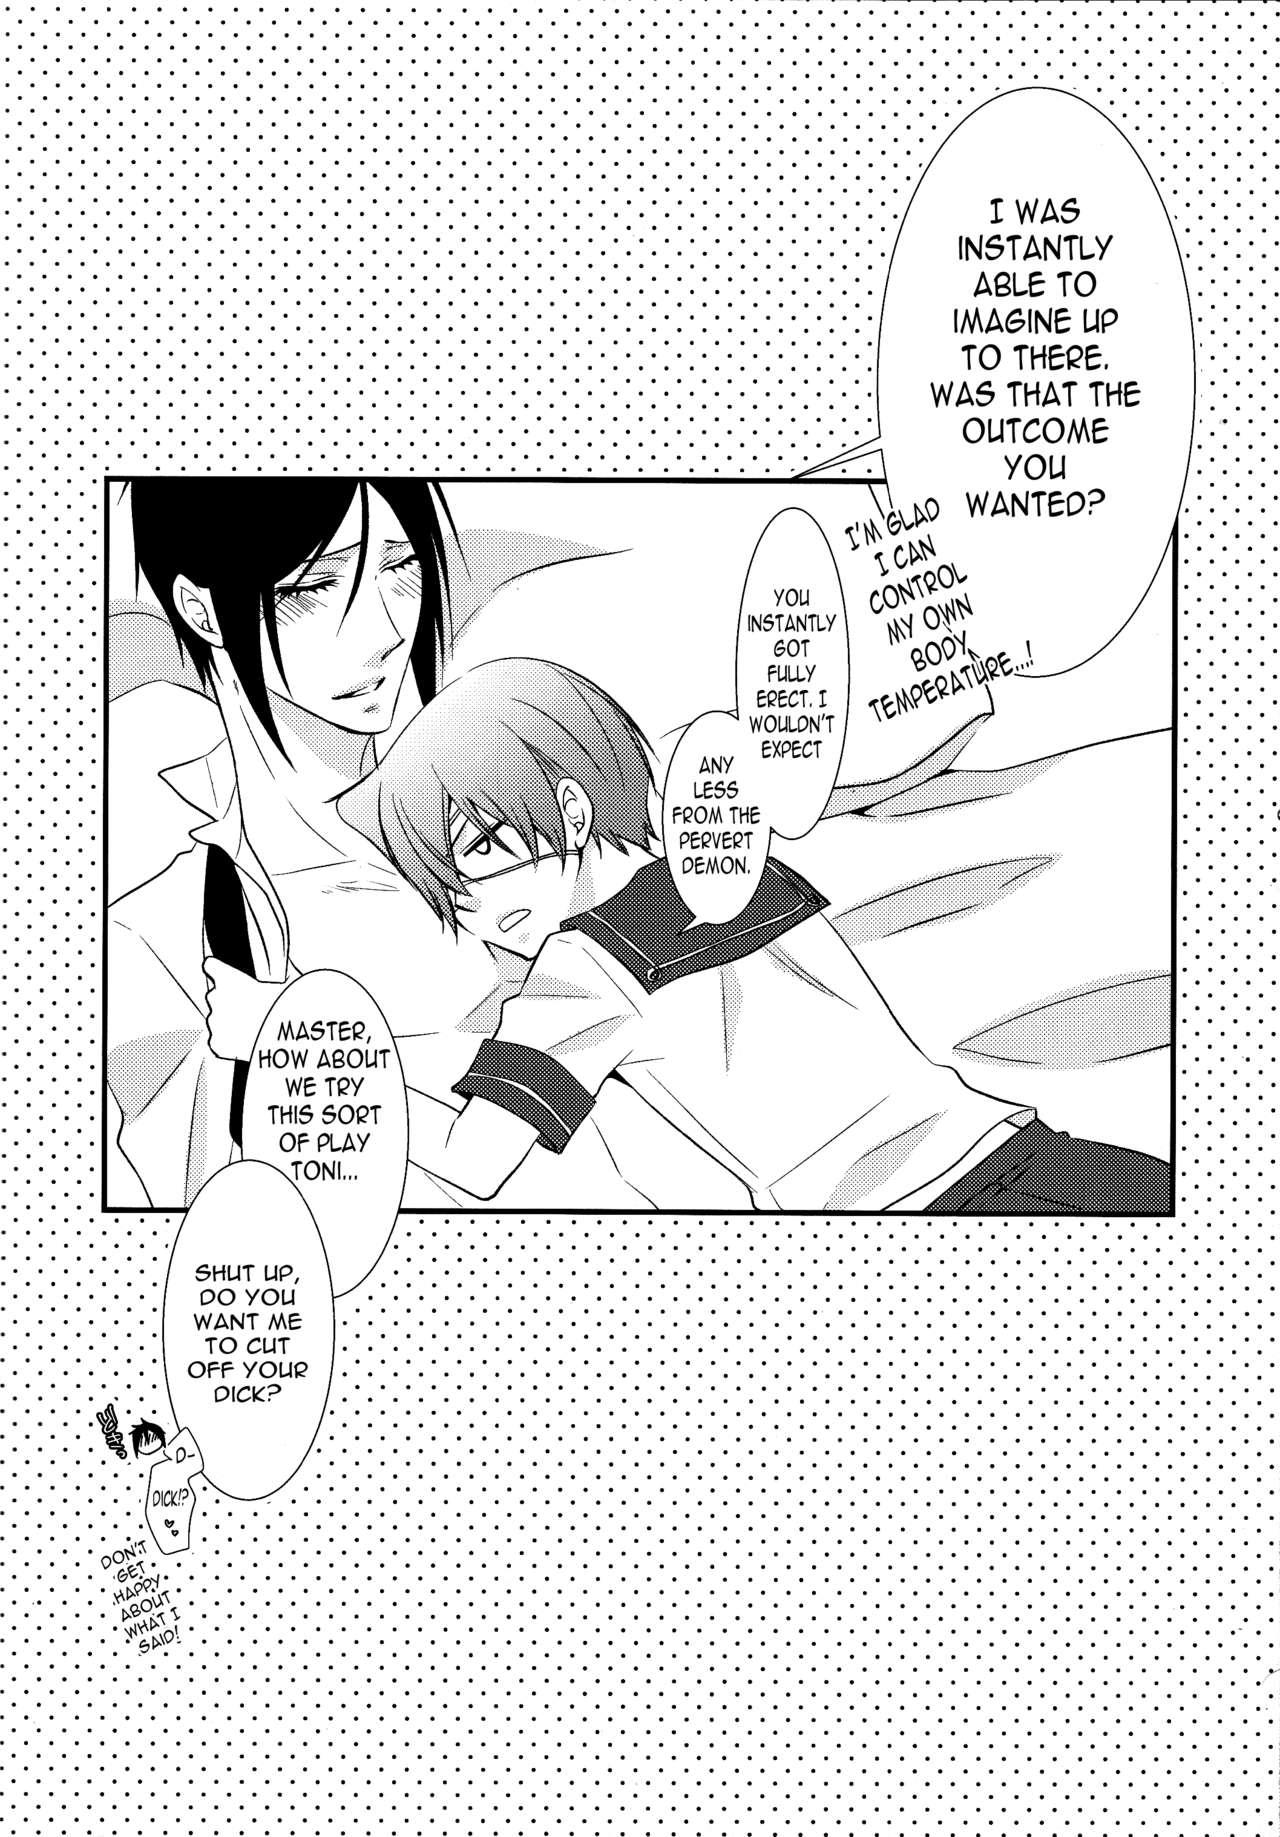 Pay C - Black butler Cuckold - Page 8